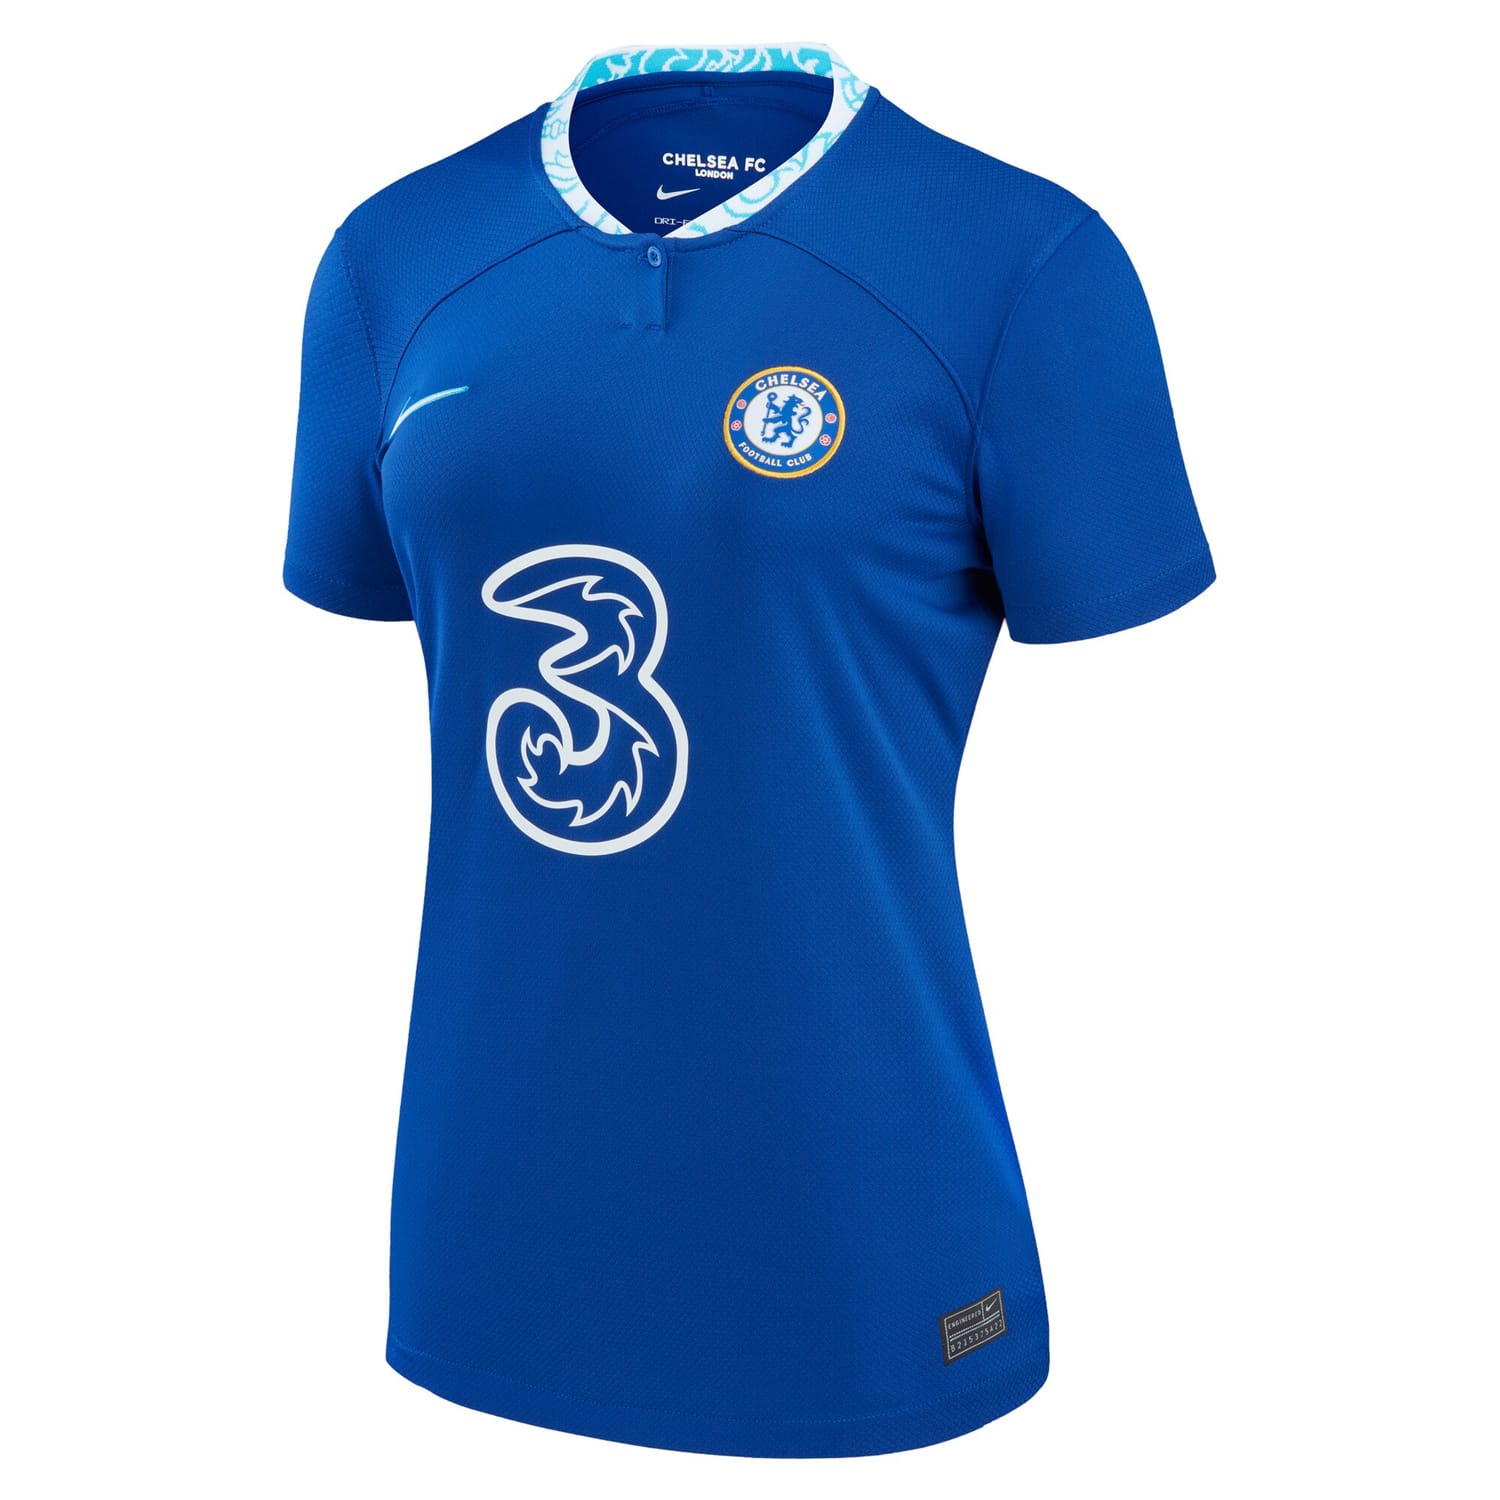 Premier League Chelsea Home Cup Jersey Shirt 2022-23 player Jess Carter 7 printing for Women